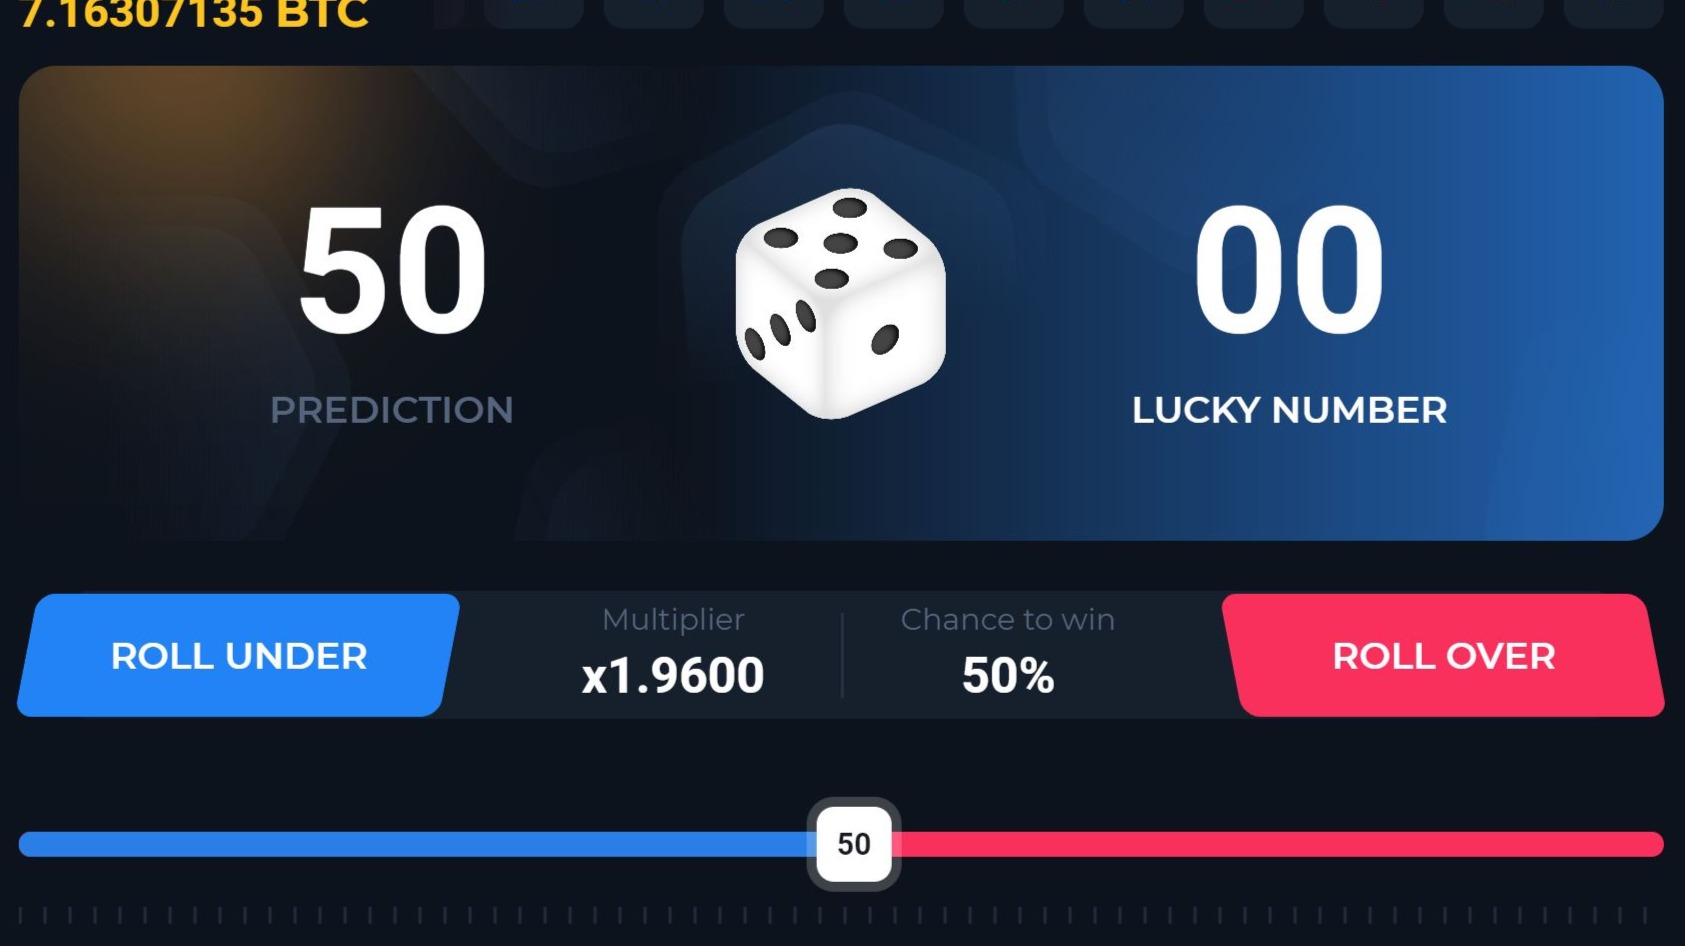 cryptolove.fun Dice Game Strategy | How to Play Dice on cryptolove.fun?